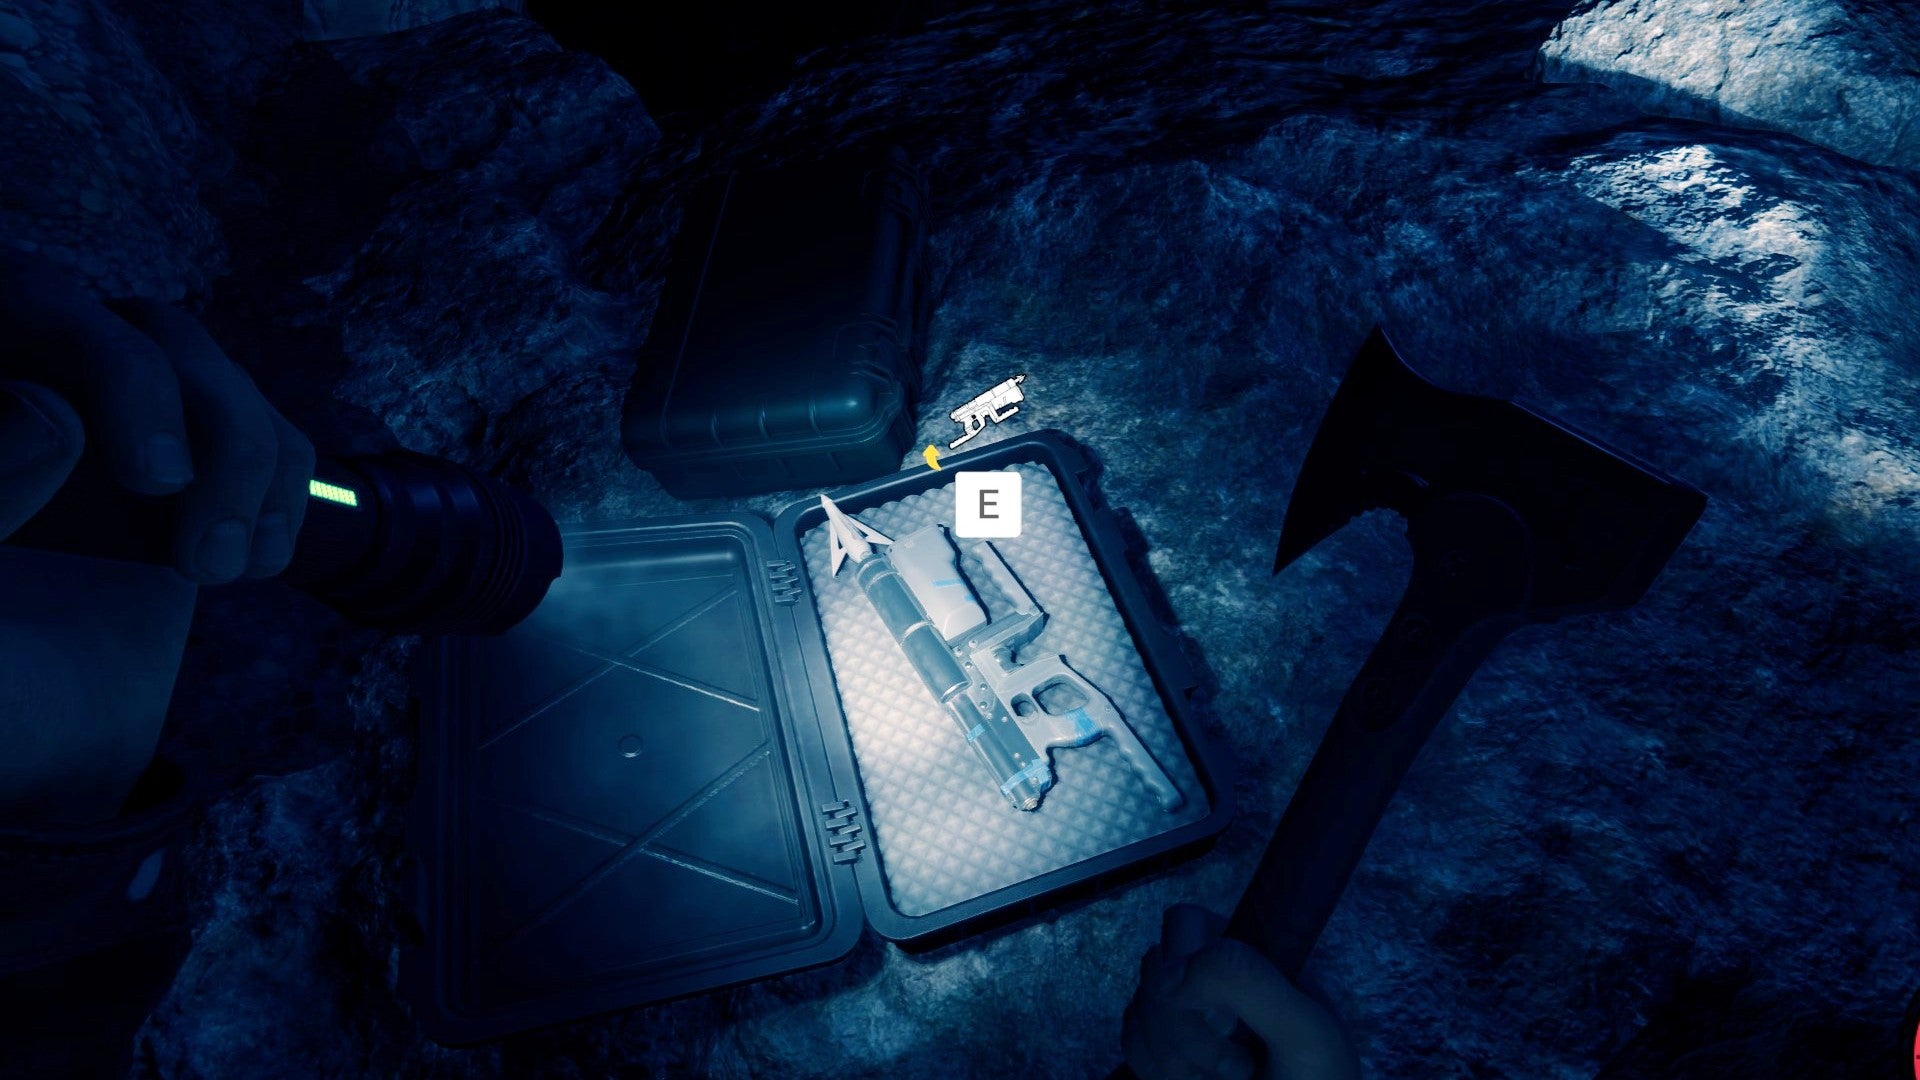 A player shines a torch on the Zipline Gun in a dark cave in Sons of the Forest.